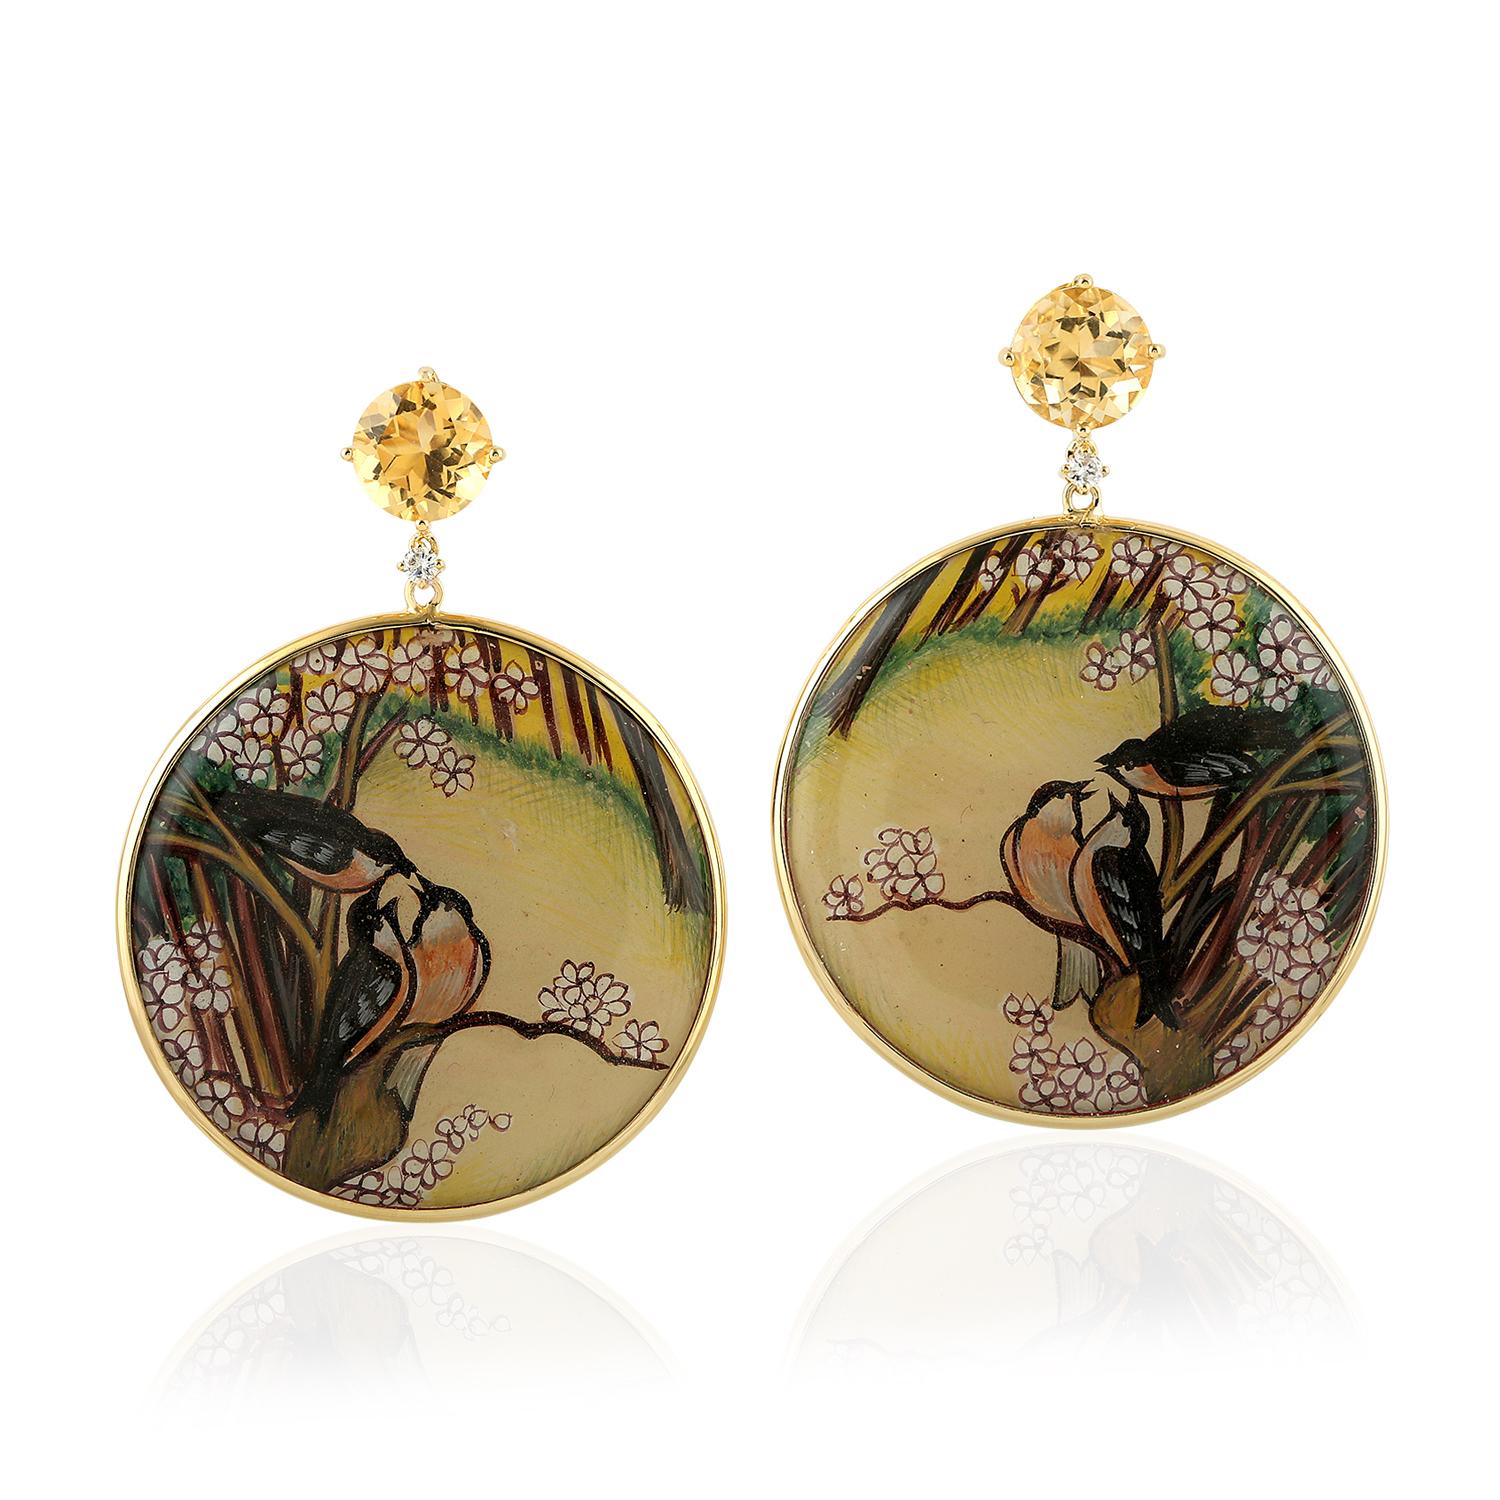 These beautiful earrings features unique hand painted miniature art in 18K gold.  It is set in 40.6 carats bakelite, 6.7 carats citrine & .13 carats diamonds.

FOLLOW  MEGHNA JEWELS storefront to view the latest collection & exclusive pieces. 